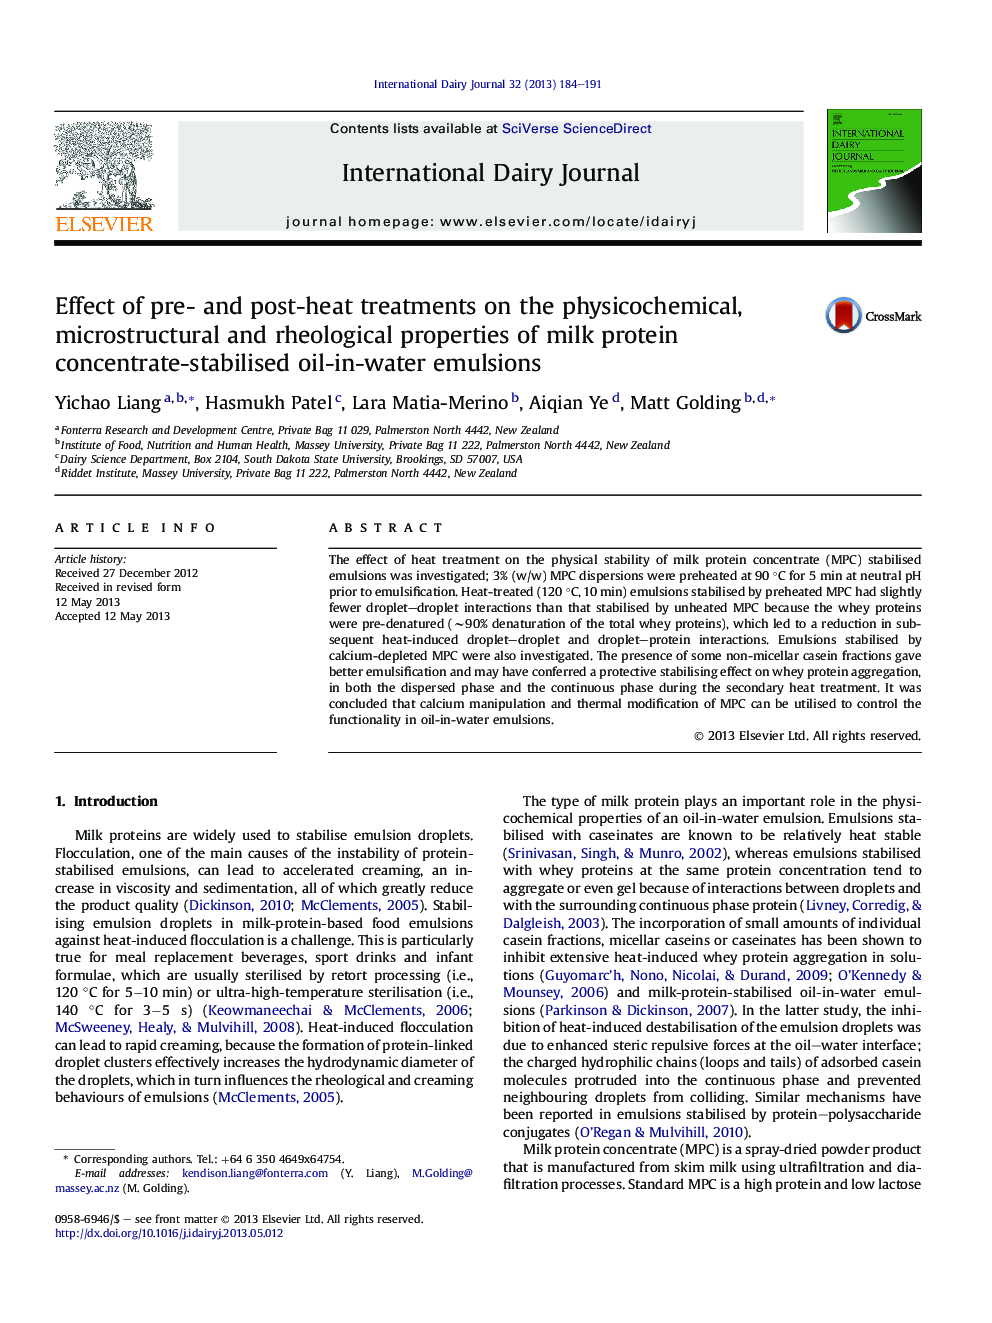 Effect of pre- and post-heat treatments on the physicochemical, microstructural and rheological properties of milk protein concentrate-stabilised oil-in-water emulsions